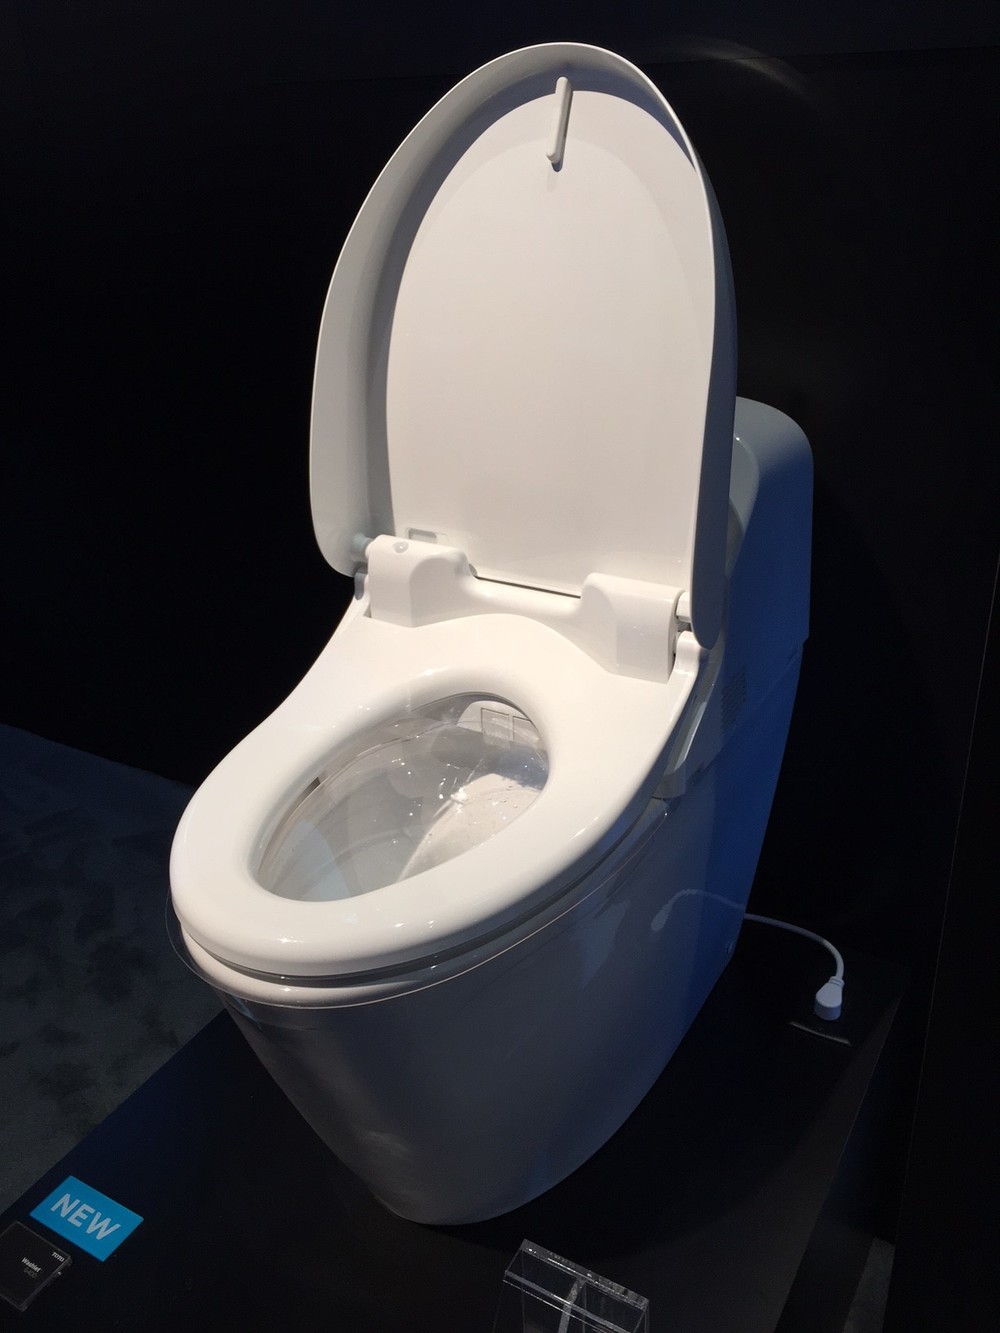 MUST-HAVE: New Toilets From Toto's 2016 Collection! — DESIGNED